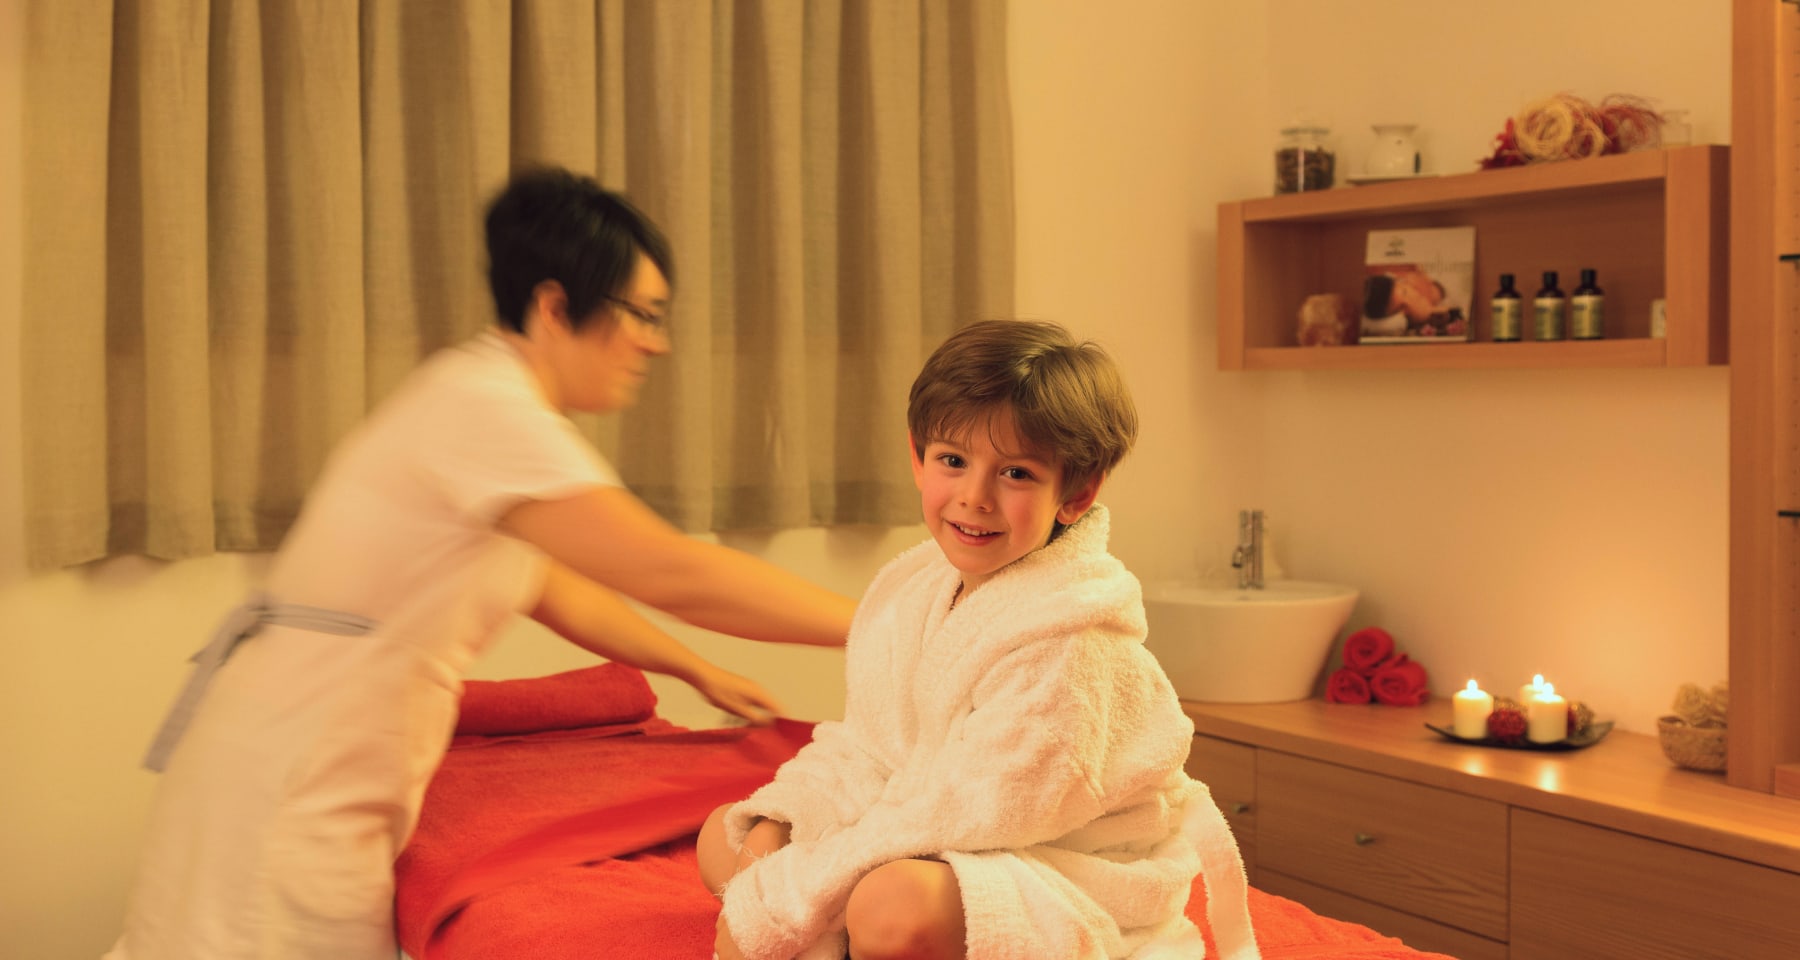 Treatments and massages for adults and children